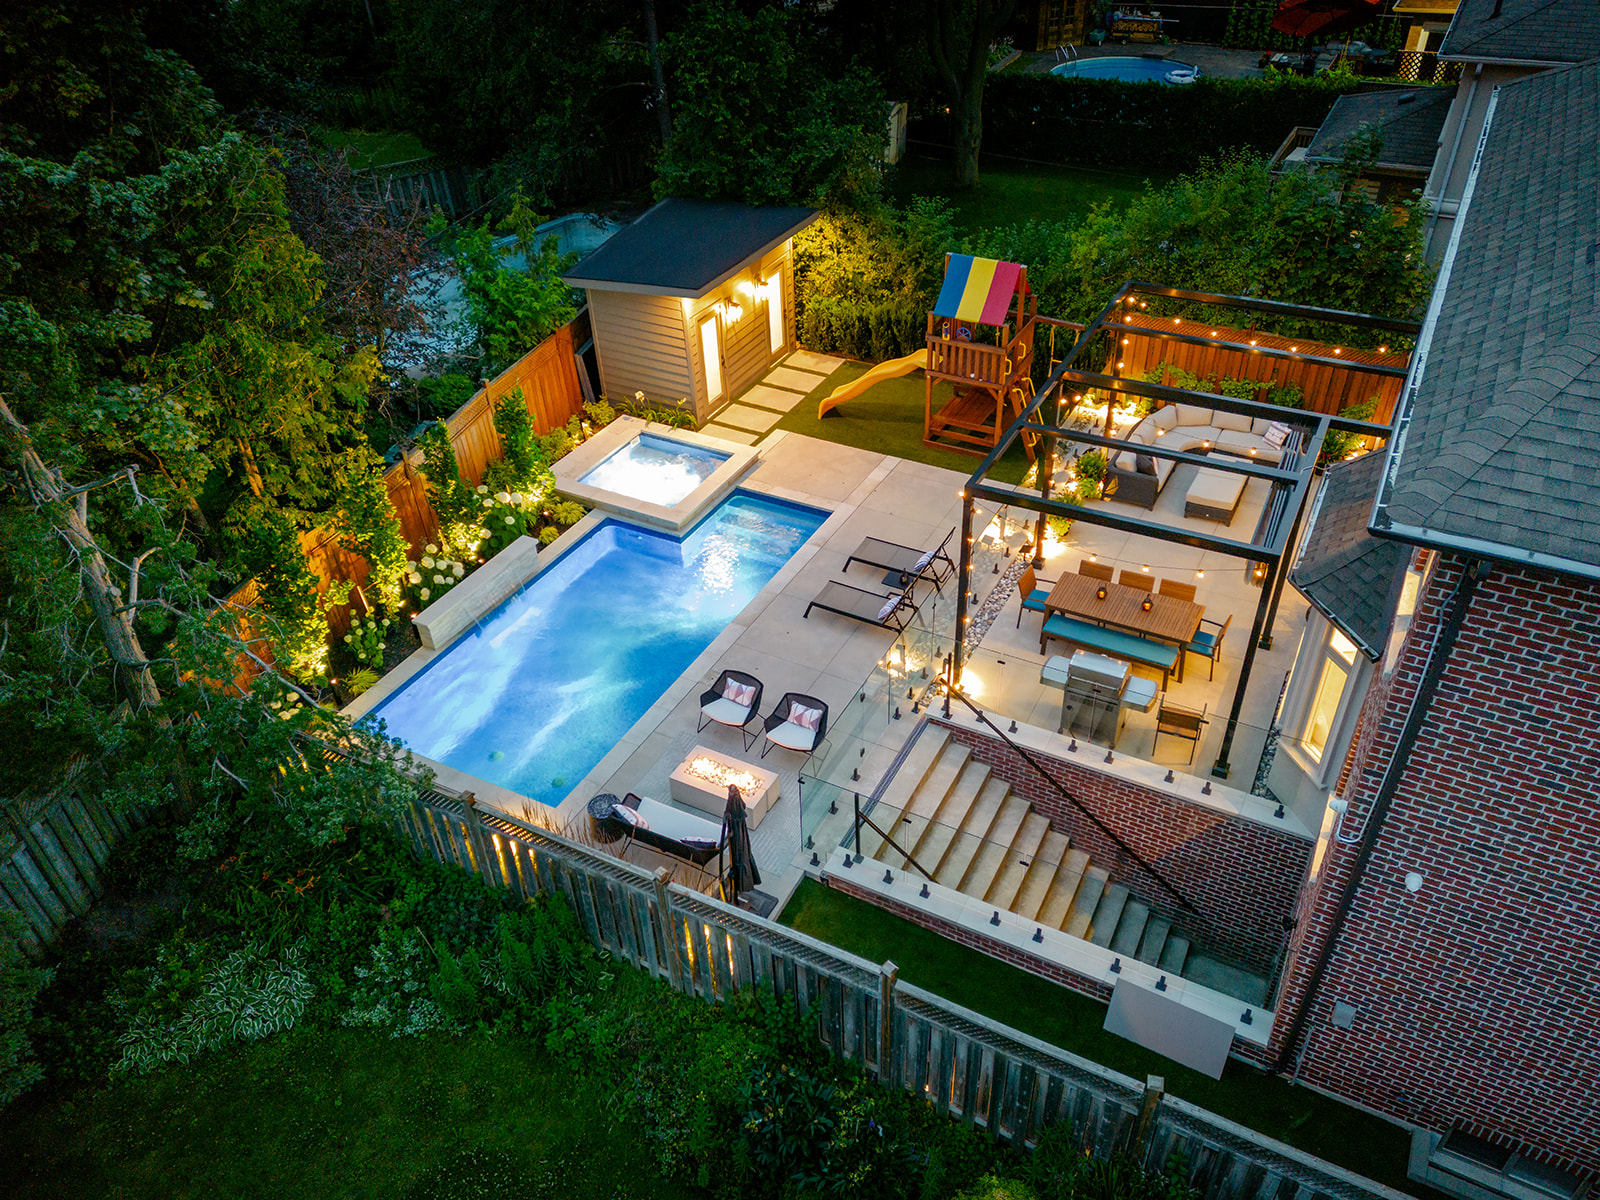 A large backyard, lights on, with an inground pool and furniture.